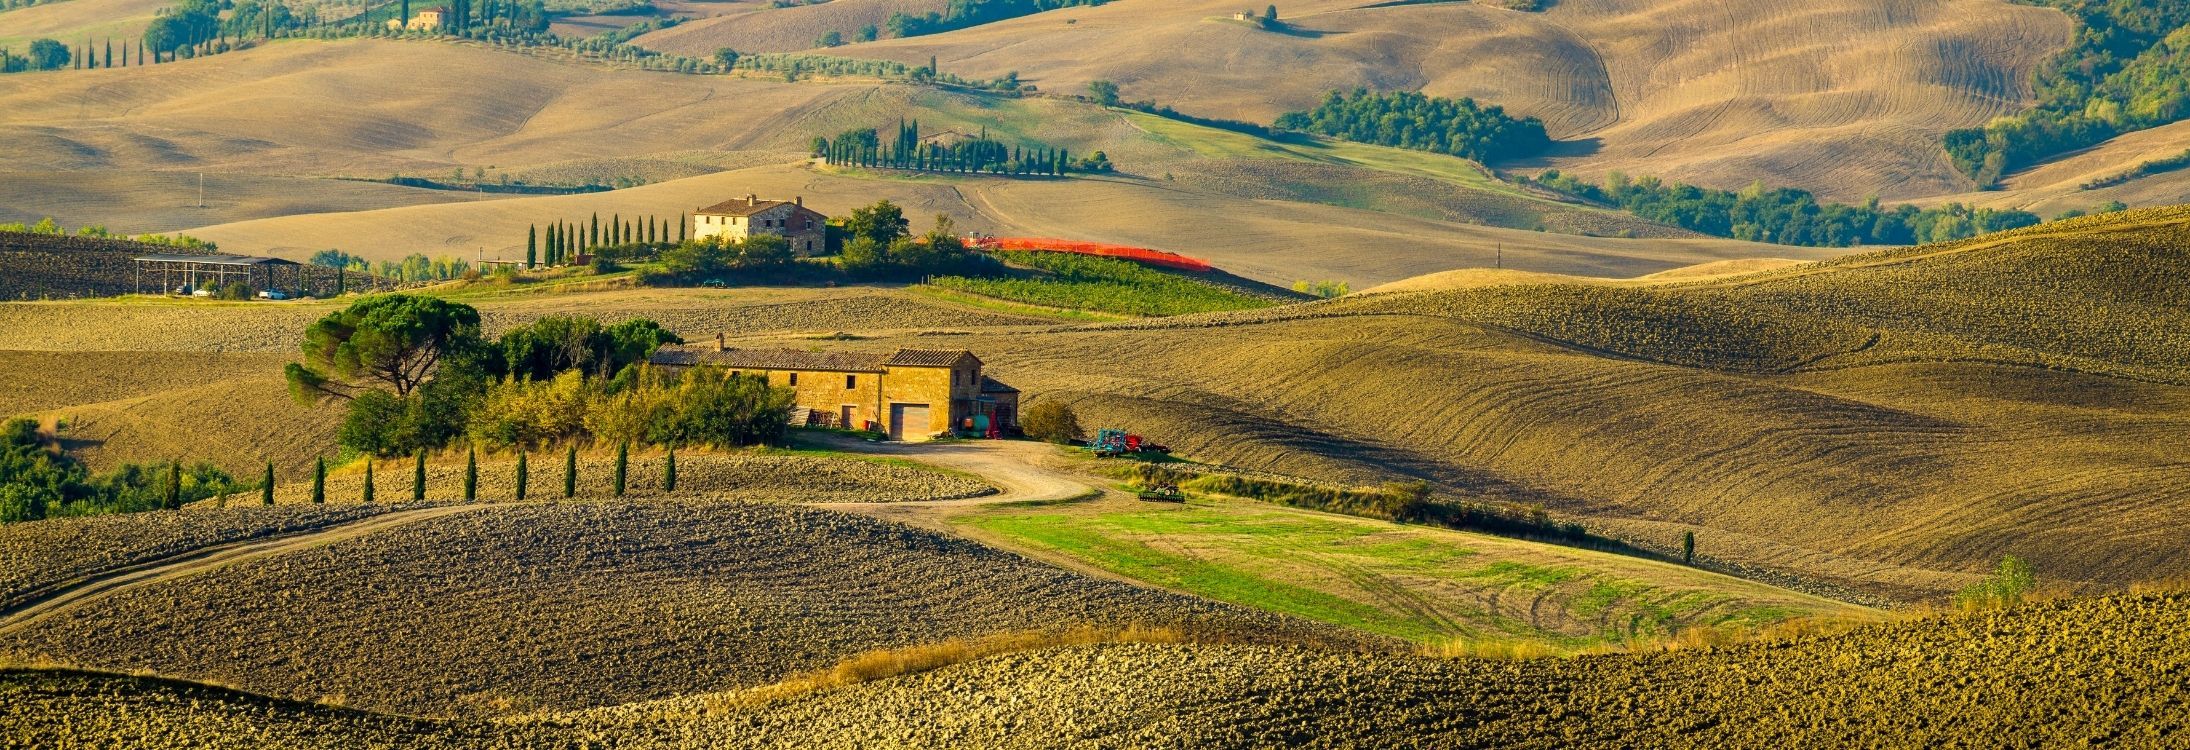 Wine and dine ‘Under the Tuscan Sun